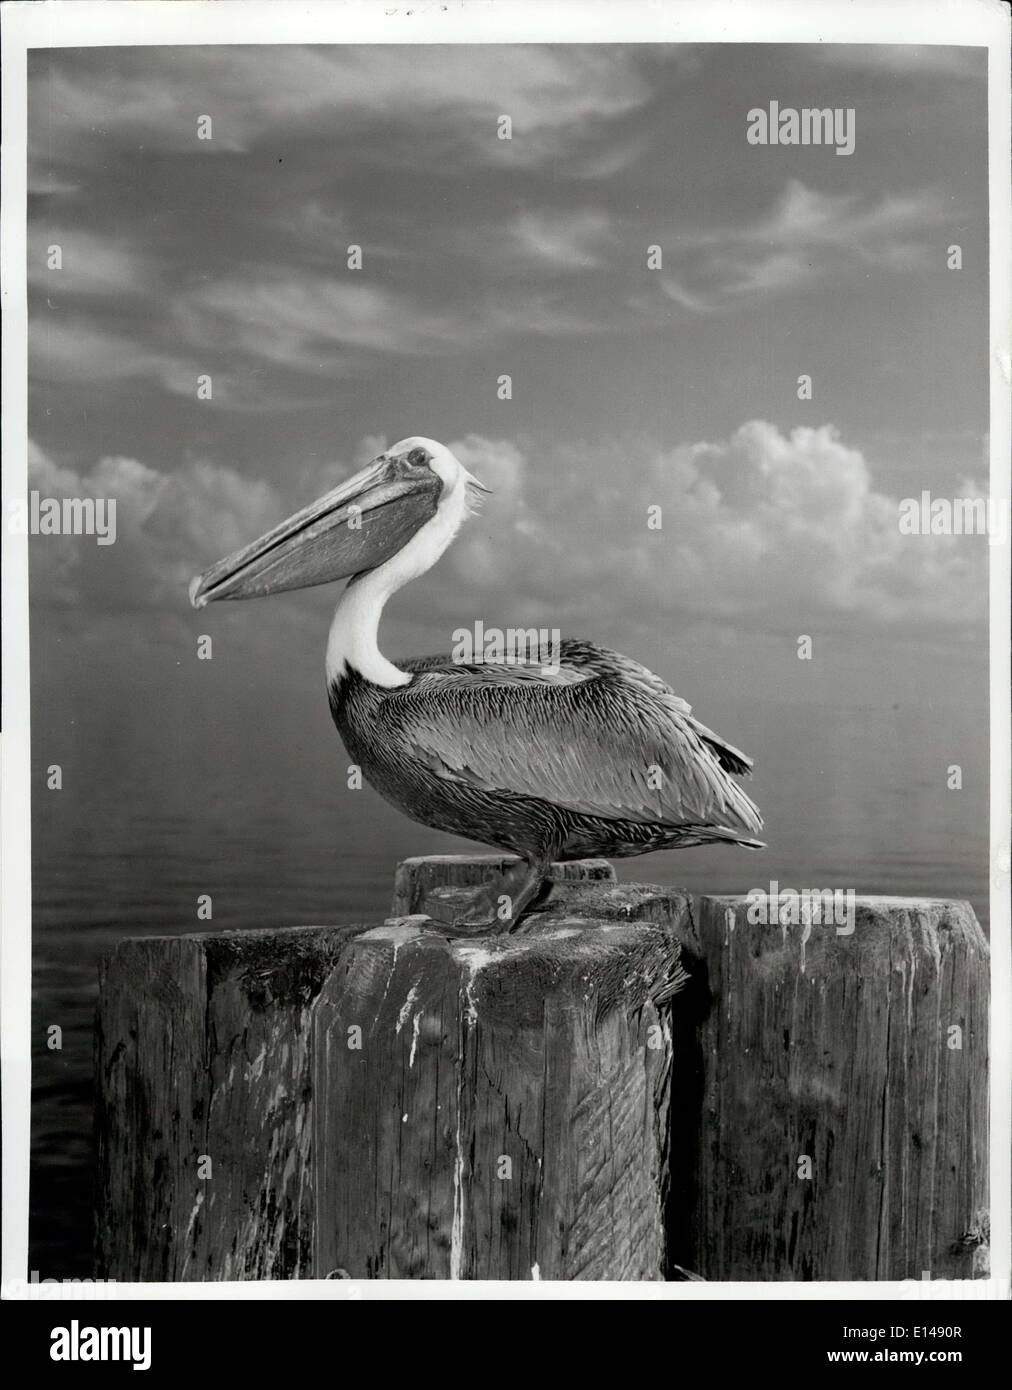 Apr. 17, 2012 - To those who say birds are the most elegant and beautiful of nature's menagerie, Florida's pelican provide an amusing rebuttal. Short on good looks, but long on personality, these shameless beggars dot the piers of Florida's coastal areas where they daily cajole small fish from patronizing fishermen and visitors.If every creature on this earth indeed fulfills a purpose.most pelican-watchers would readily concede that this comic waterfront scavenger was born to make people laugh again like children. Stock Photo